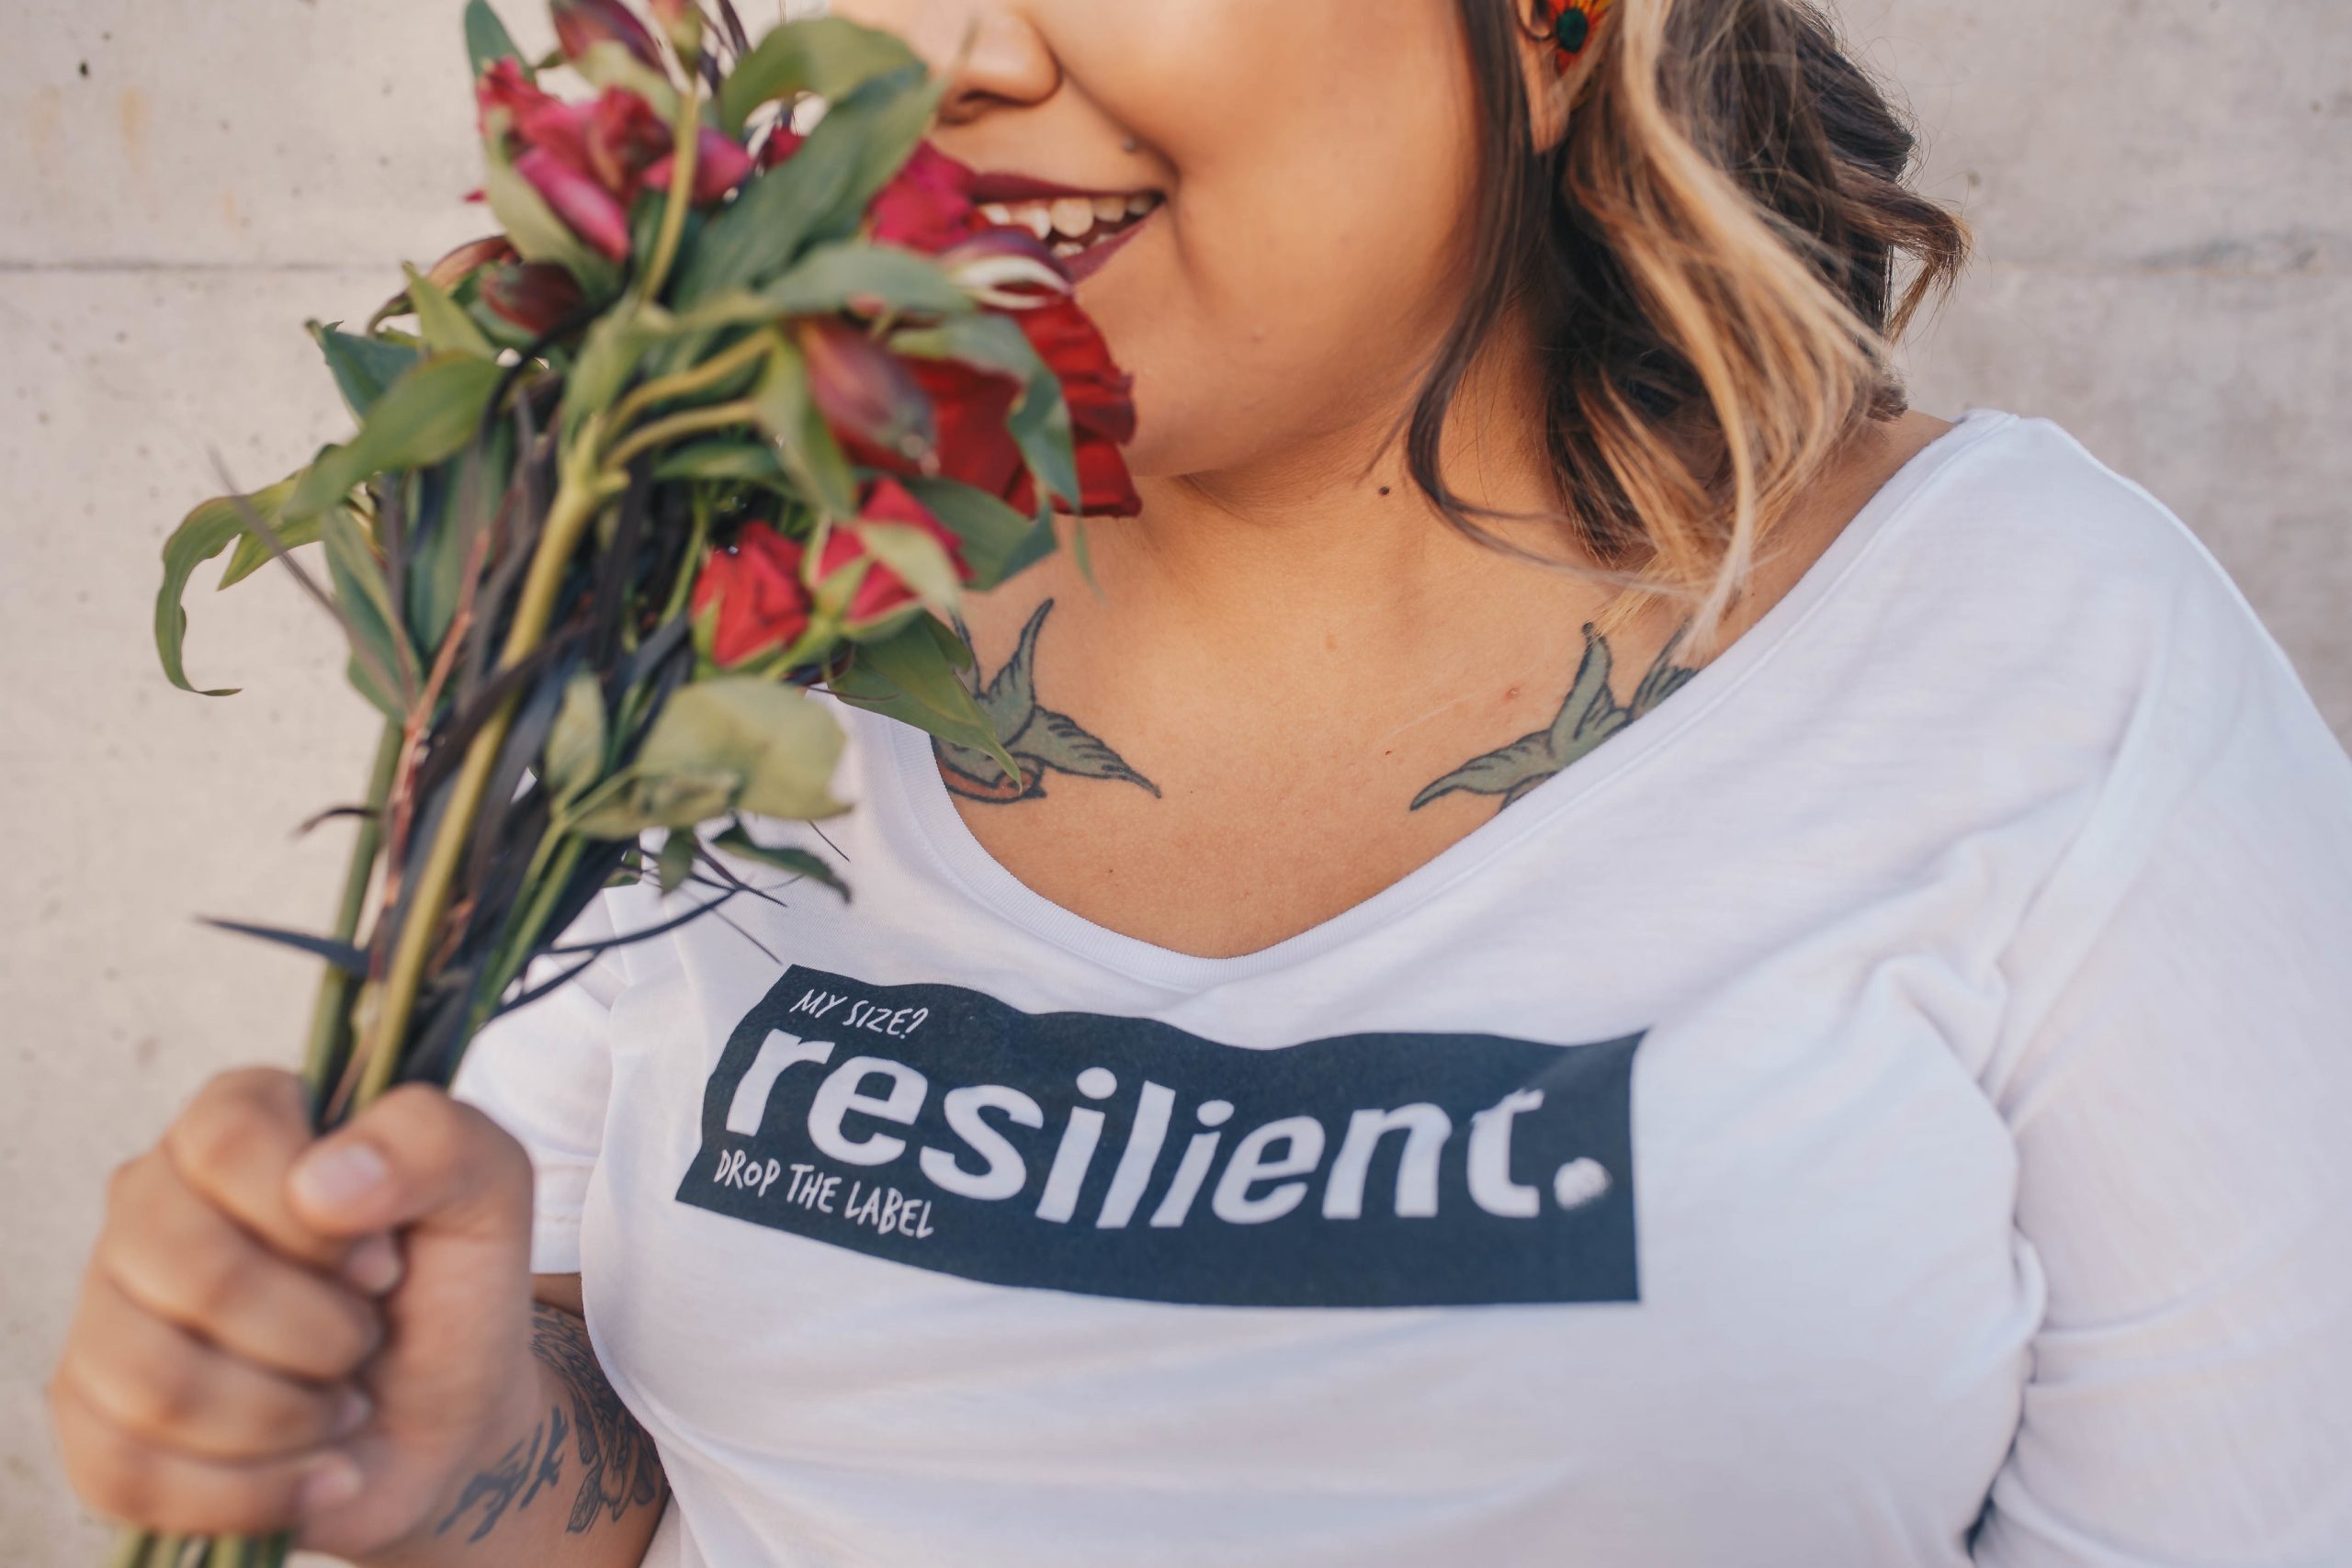 Resilience, the ability to bounce back from setbacks. Managing the stresses of life in an agile way is one of life's key skills. But how to boost your resilience? We take a look.